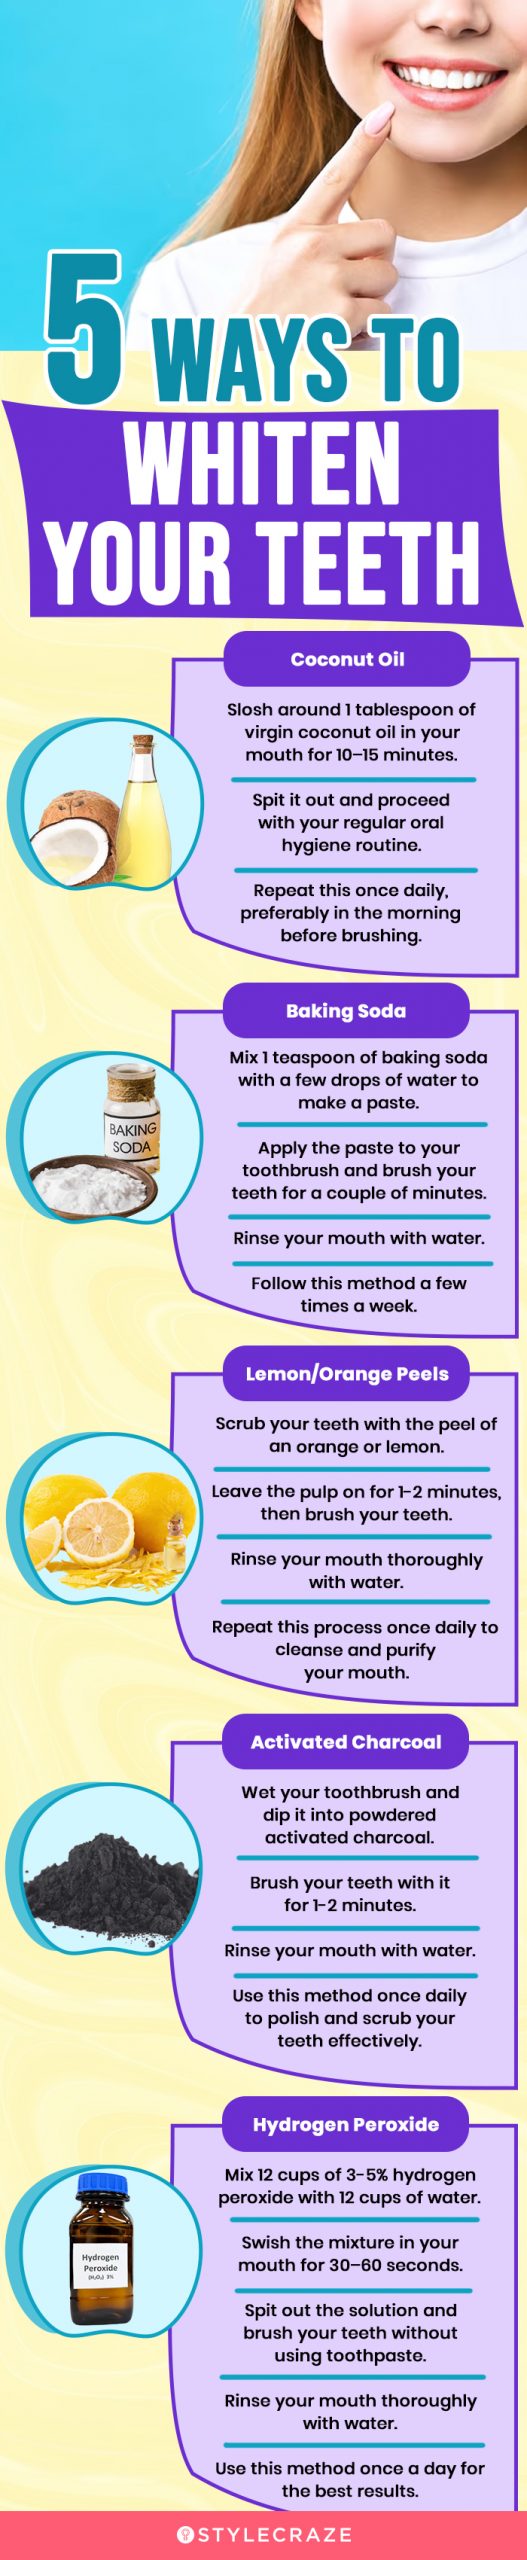 5 ways to whiten your teeth (infographic)